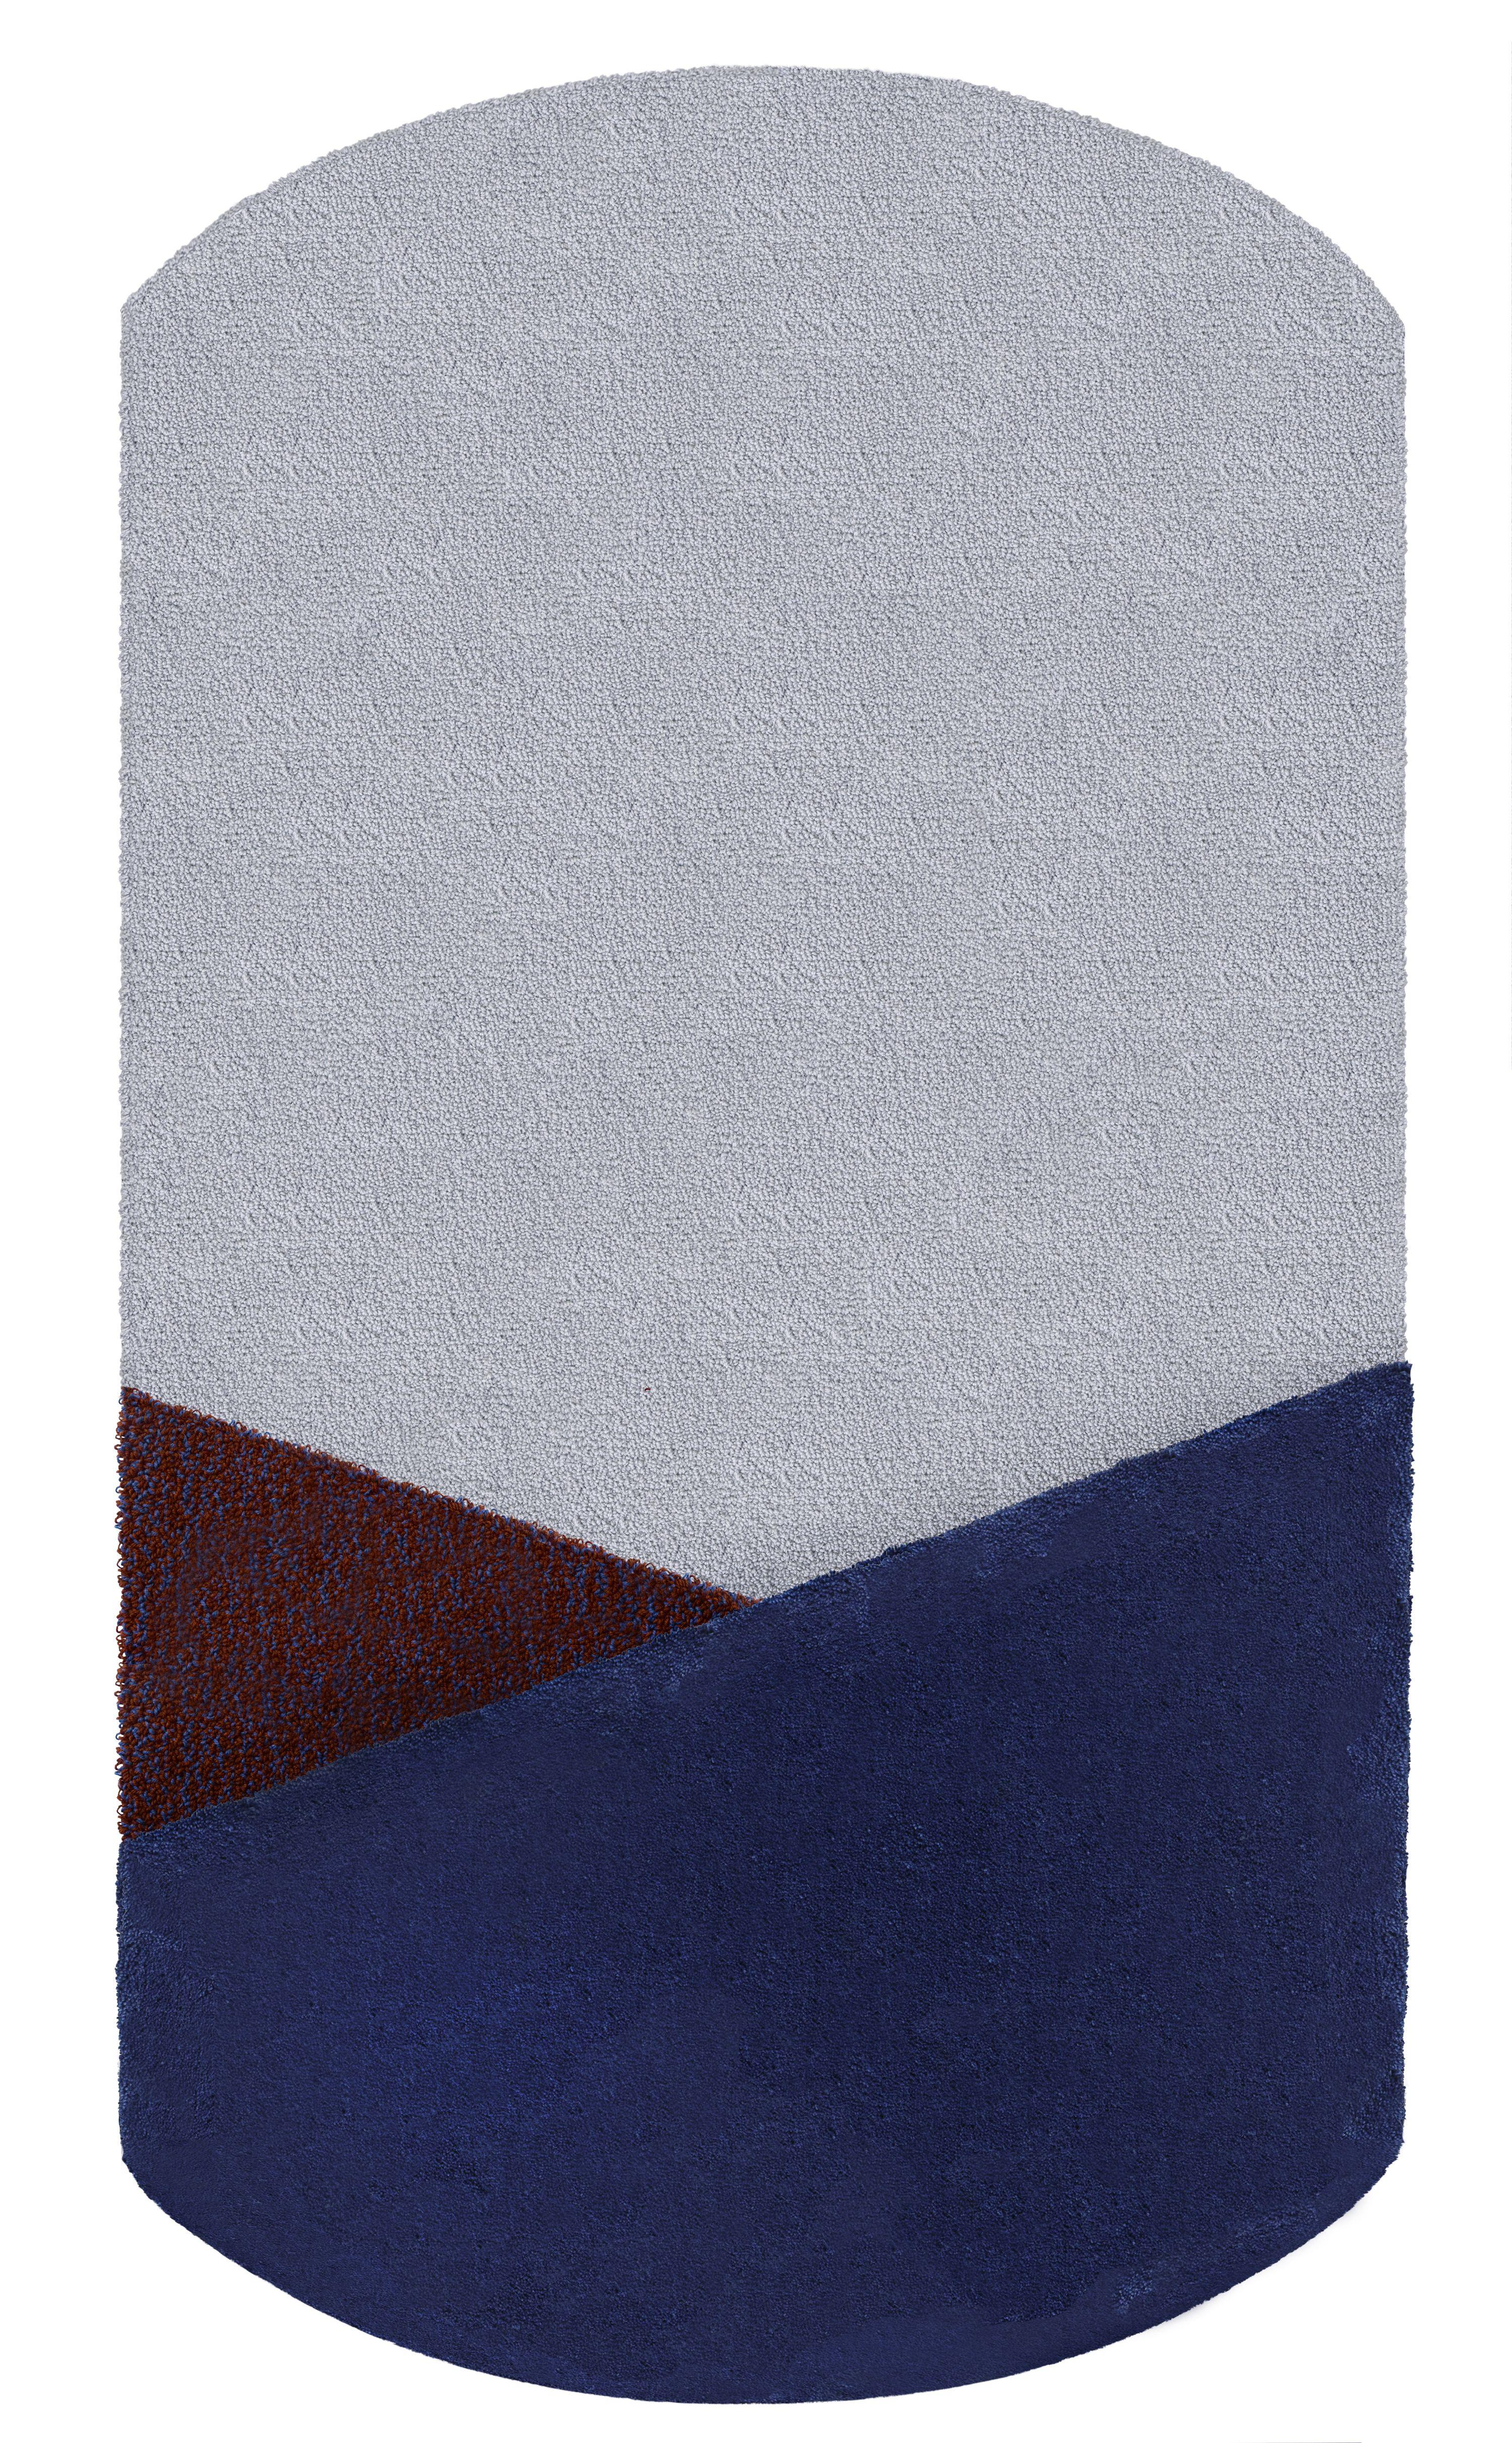 Composition of 3 100% New Zealand wool rugs
Designed by Seraina Lareida 
Made in Italy

Oci triptych is a composition of three rugs that combined together it makes a single design easily adaptable to any type of space.
Walking on, you can feel